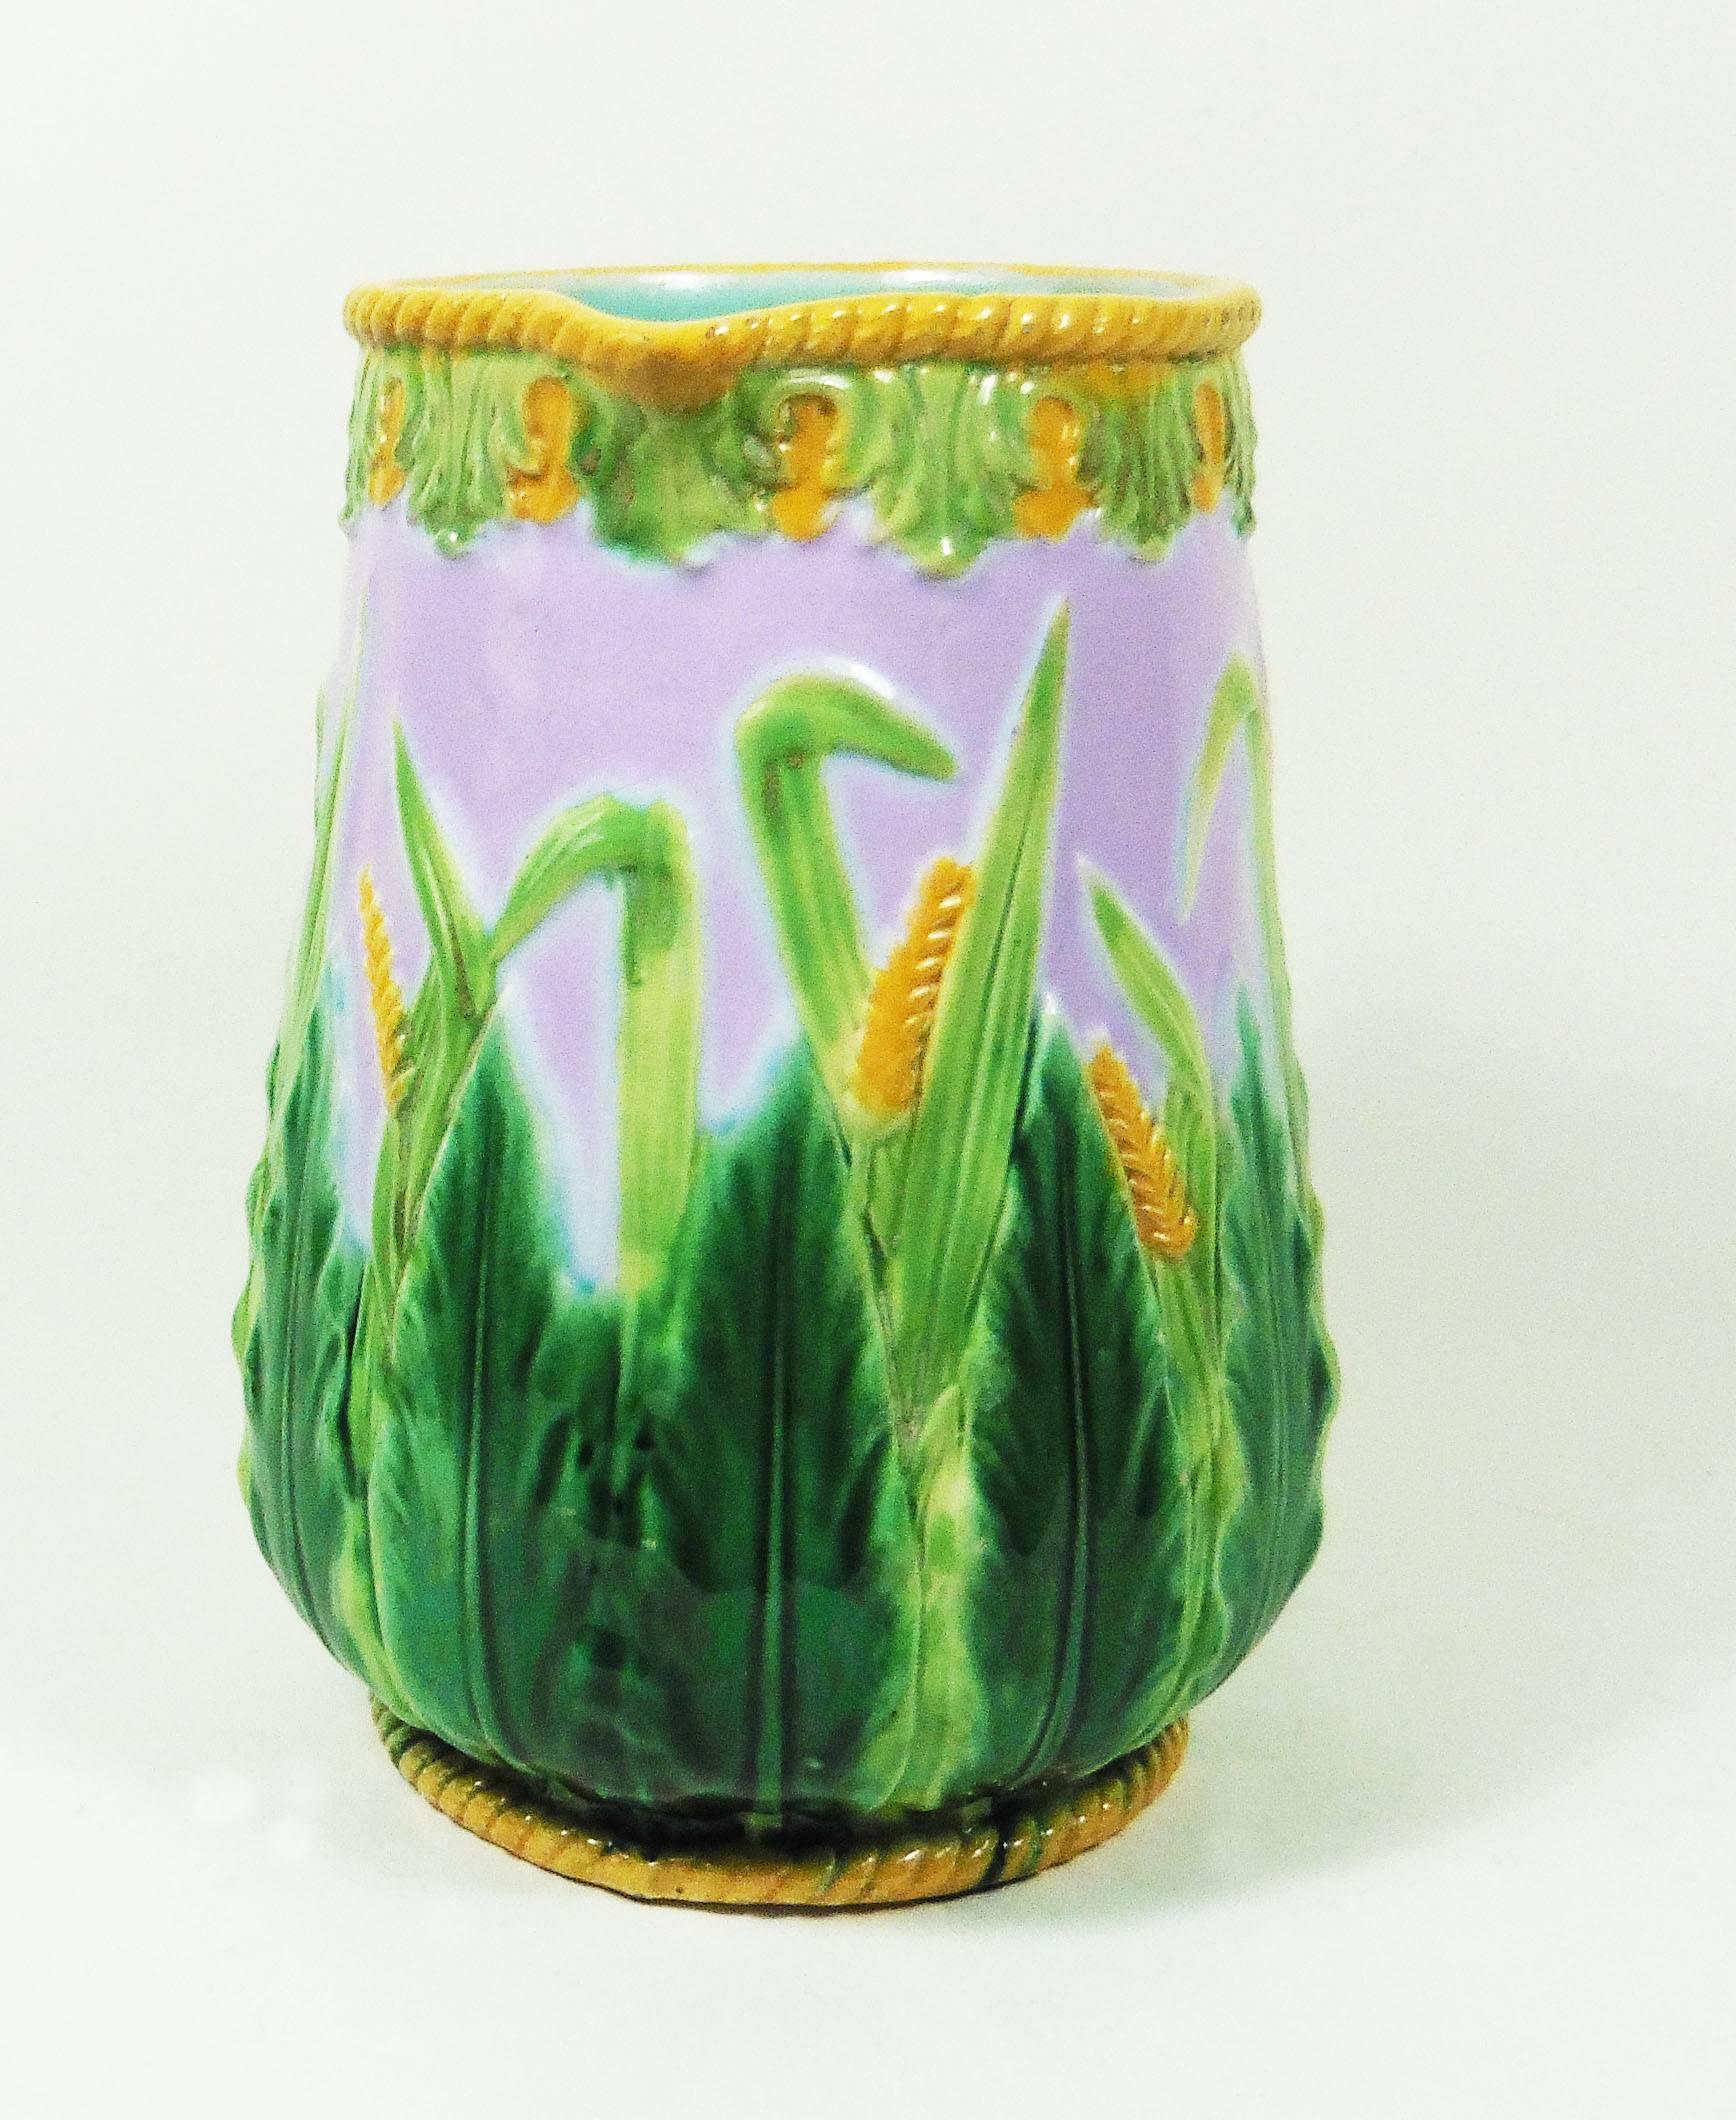 A Victorian Majolica wheat pattern pitcher jug attributed to George Jones, pattern n°1806.
The composition show large green leaves mixed with wheat on a pink lilac background.
A second smaller pitcher is available.
Reference / Page 42 